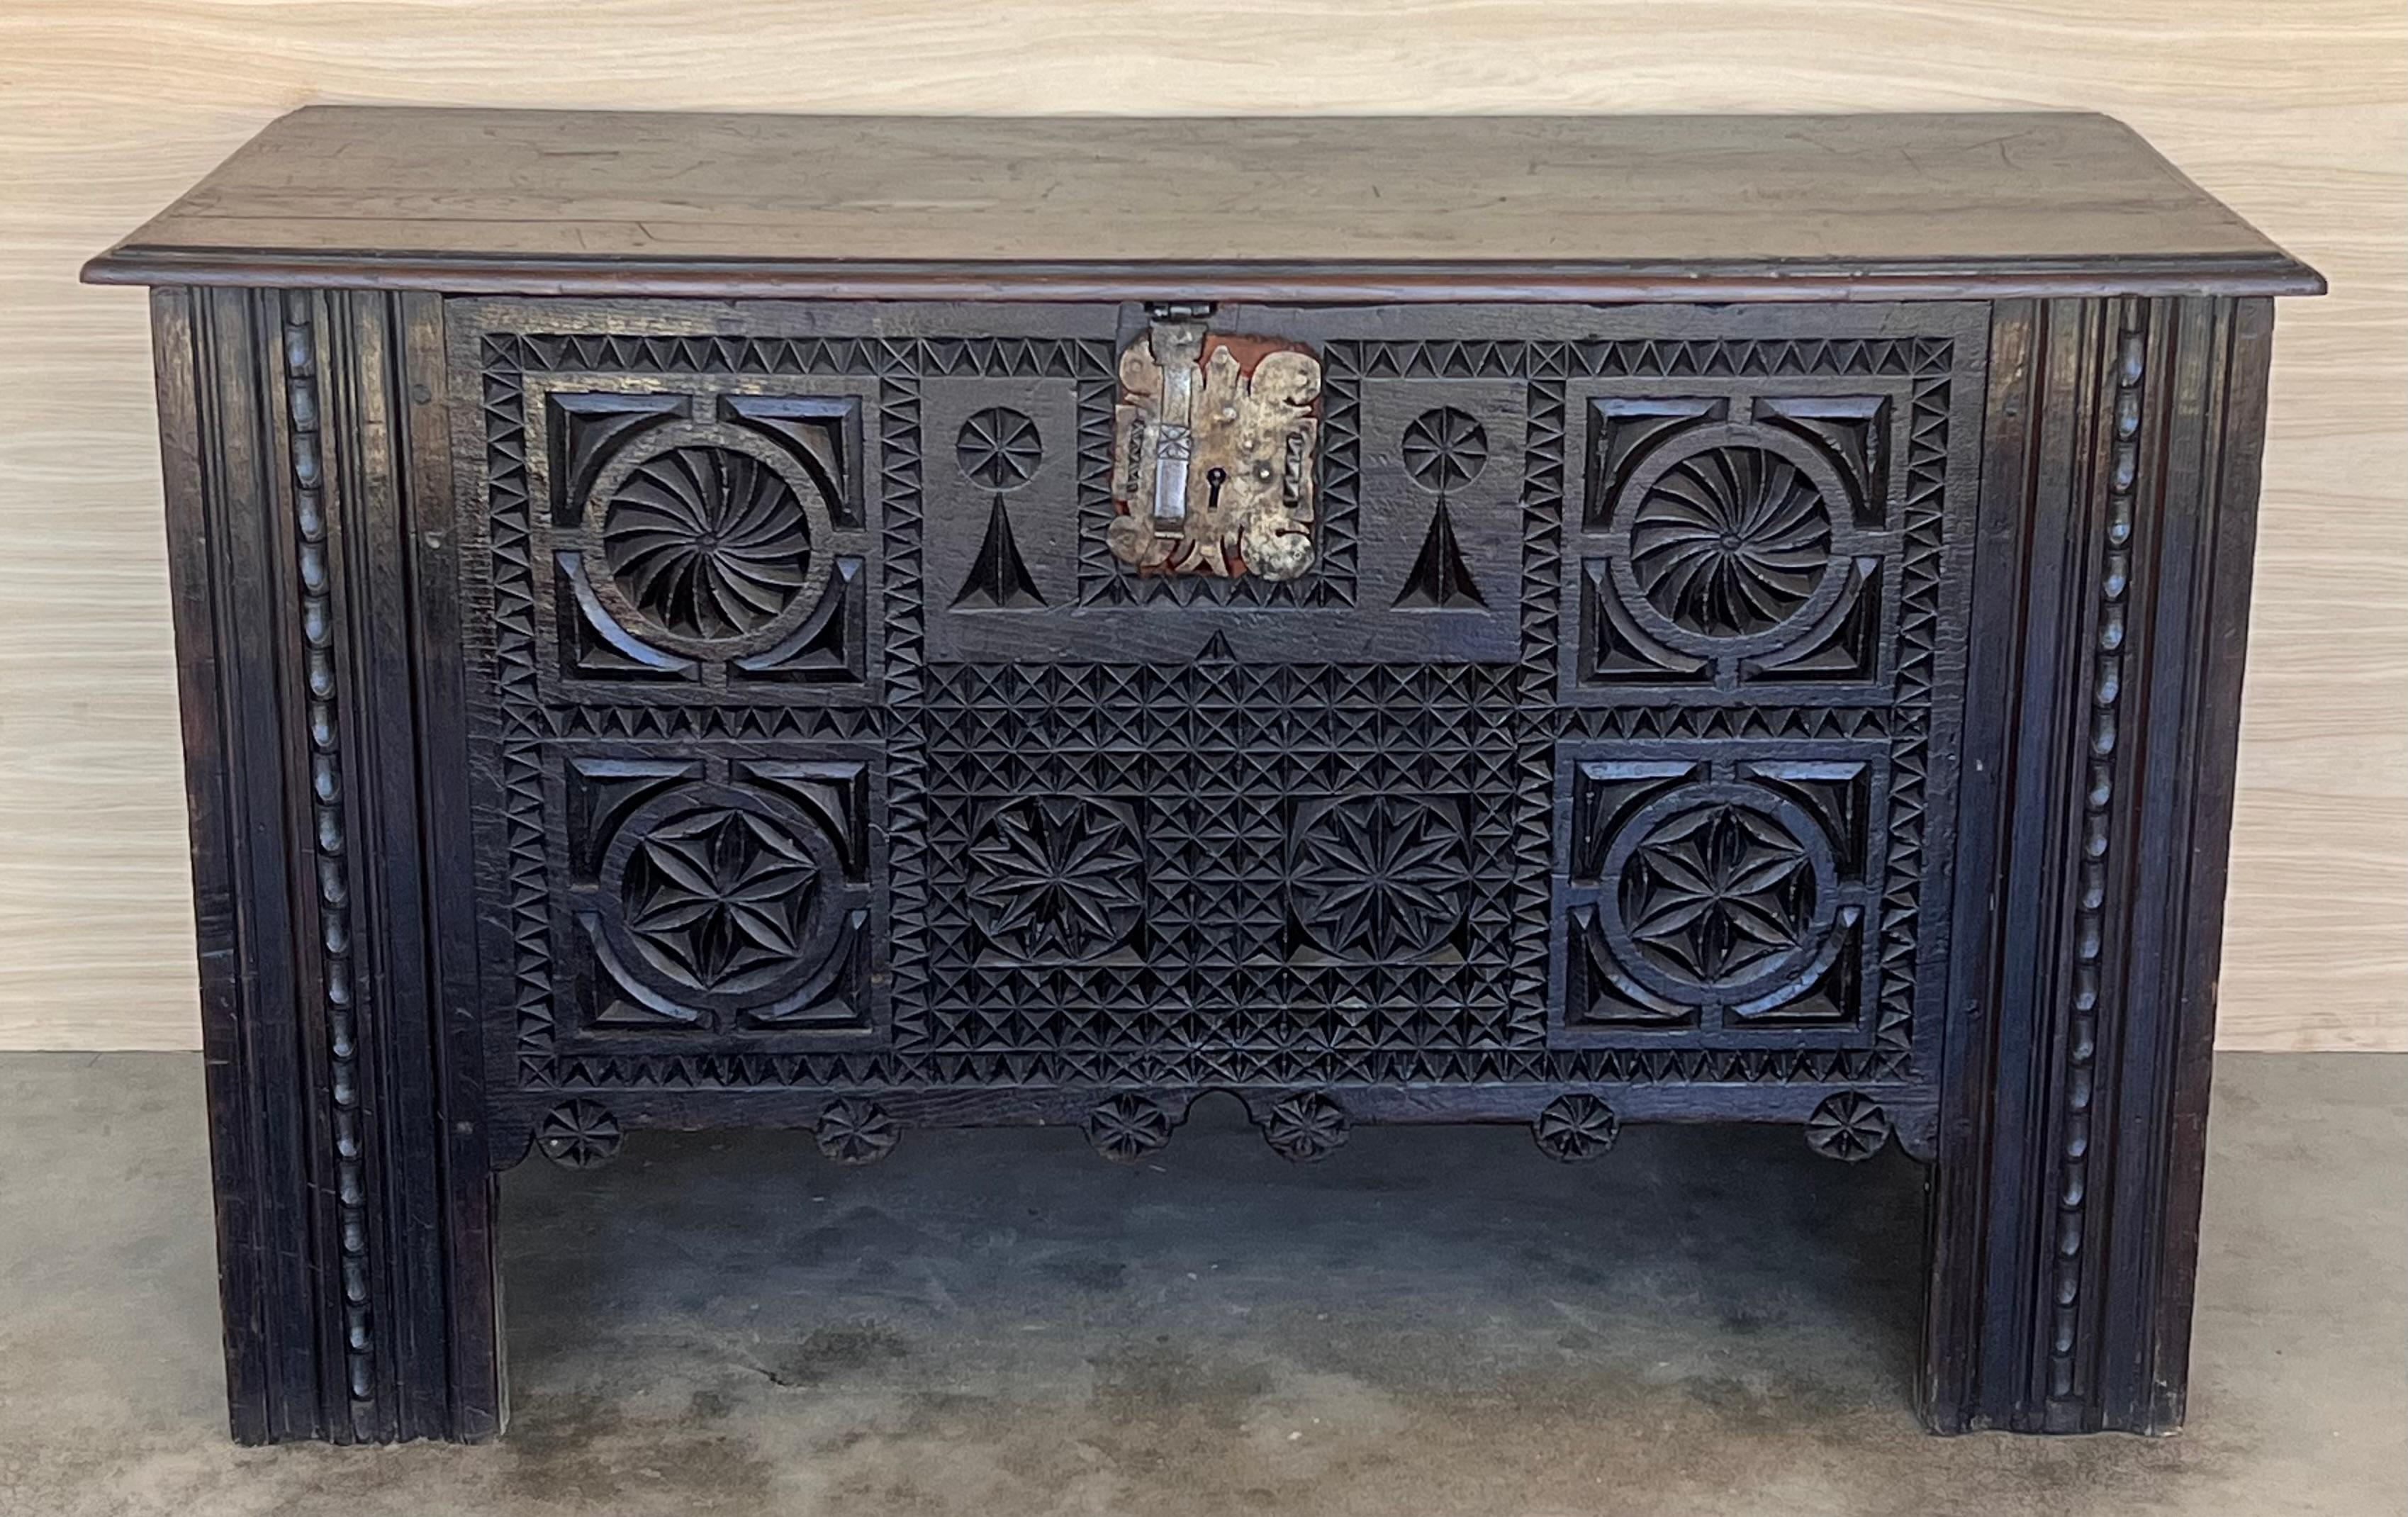 Originating from the autonomous region between France and Spain known as the Basque Country, this oak kutxa trunk was hand-carved in the late 1700s. In the Basque language, kutxa translates to “box”, which is an apt description for this very large,